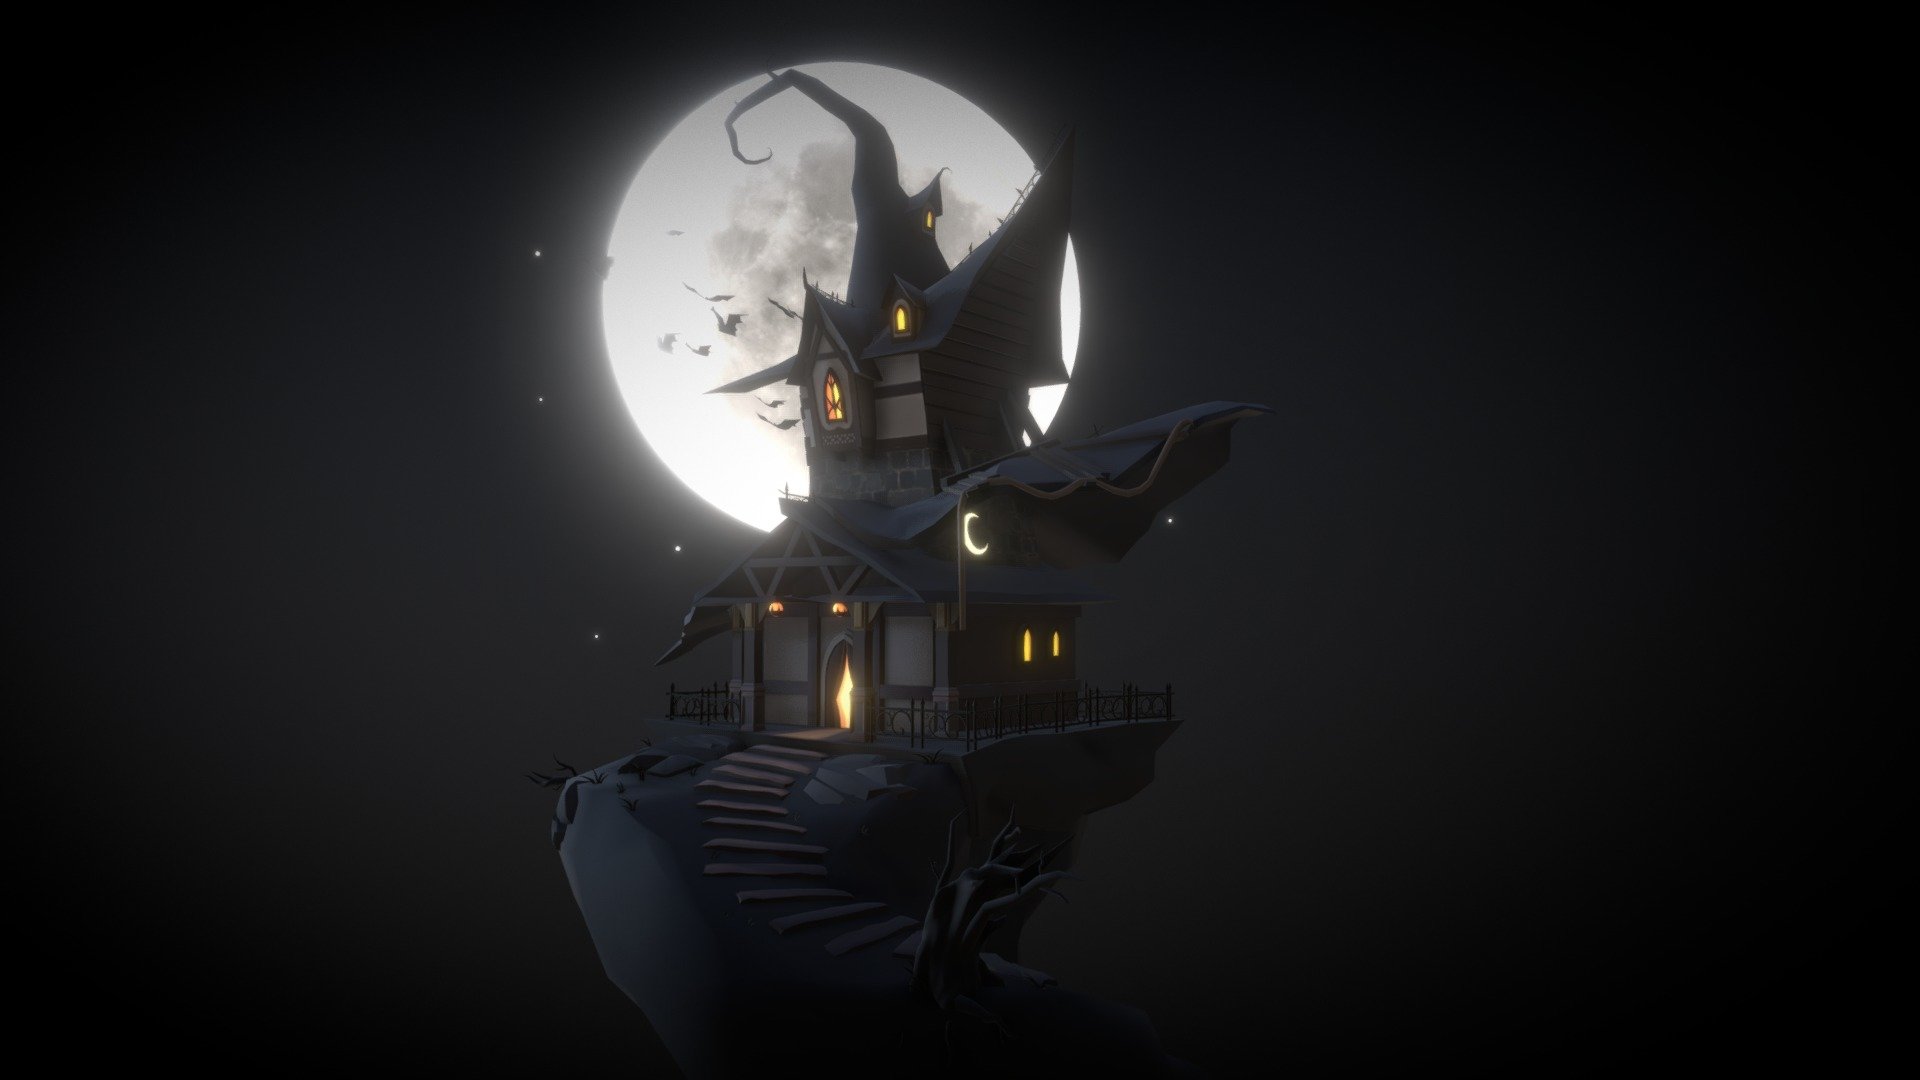 Student work 

Textures aren't finished, ran out of time for my assignment.

concept art by K Mook - Witch House - 3D model by HHayes 3d model